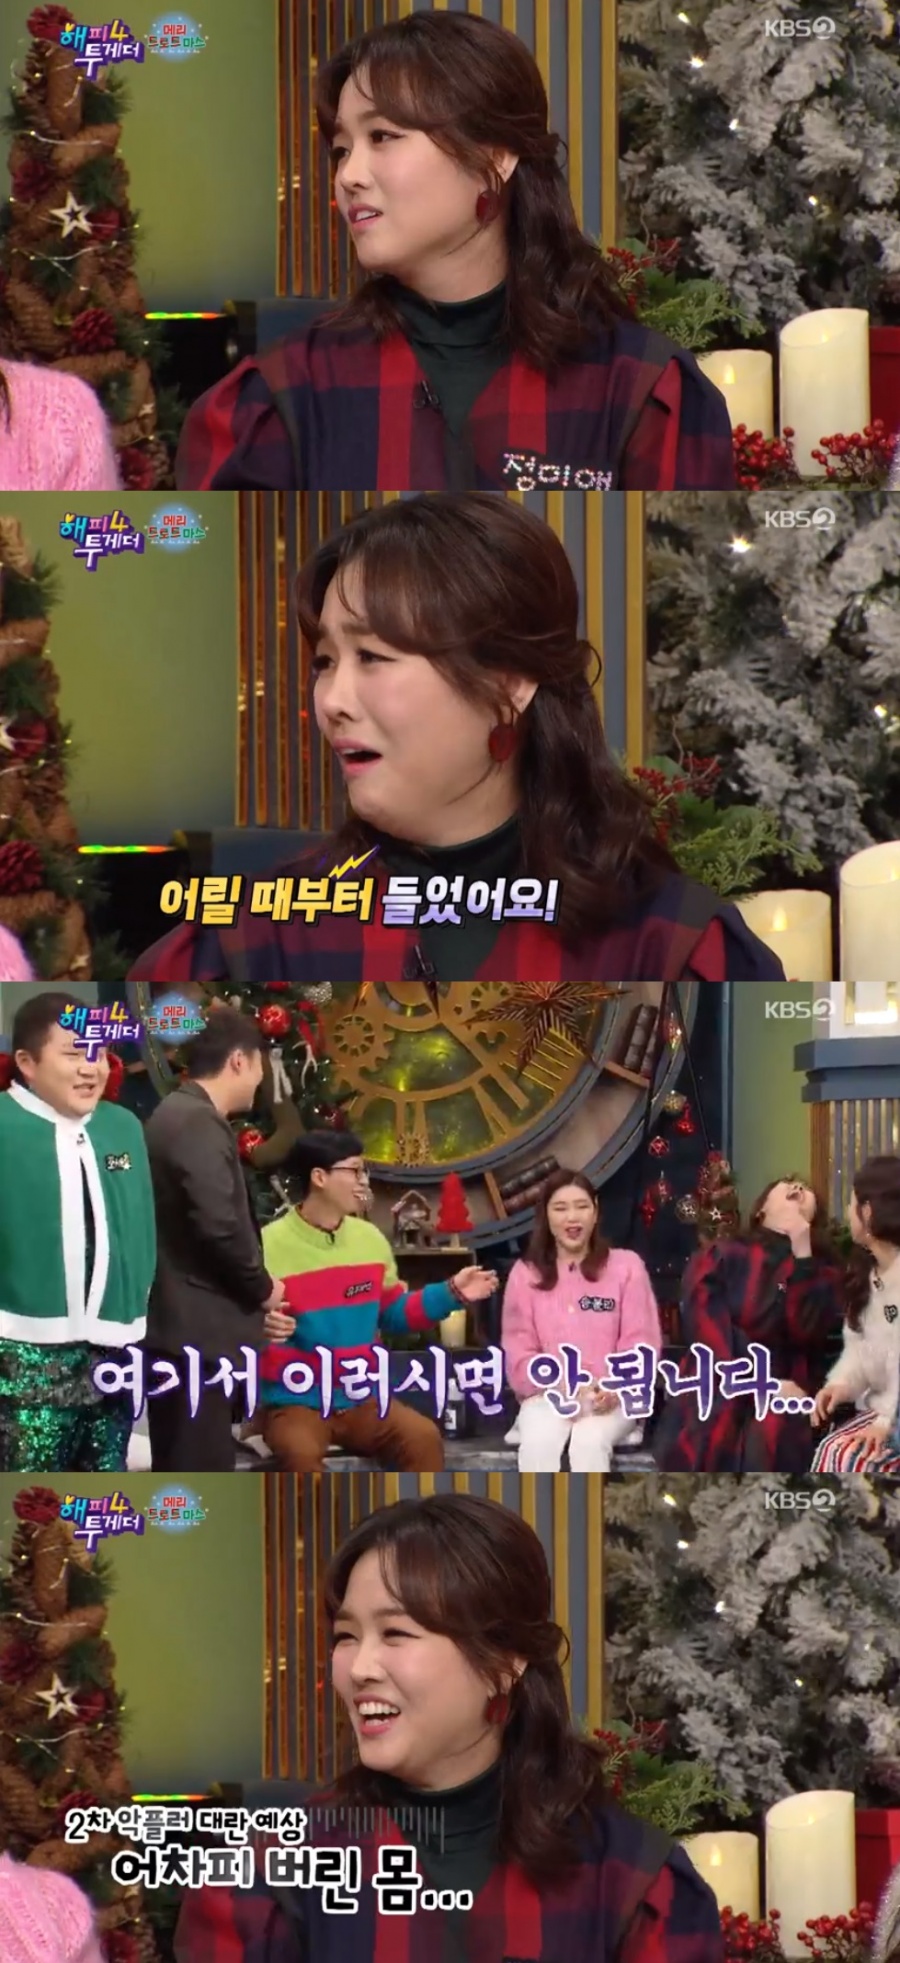 KBS2 Happy Together 4 The Miami admitted Song Hye-kyo of Trot.On KBS2 Happy Together 4 broadcast on the 26th, The Miami explained the resemblance of Song Hye-kyo.The Miami explained the reason for the praise that she had lost weight and changed a lot, saying she had to lose weight shortly after giving birth at the time of Miss Trot.He then expressed his embarrassment about the Song Hye-kyo modifier of the trot system, listening to the resemblance to Song Hye-kyo.However, unlike the one I told you not to do, the explanation was I did not hear it recently, but I heard it from a young age.The Miami admitted to the Song Hye-kyo resemblance, conveying the wish that it resembled a little.On the other hand, Happy Together featured Song Gain, Jung Da Kyung, Hongja and The Miami as special Mary Trotmas.=